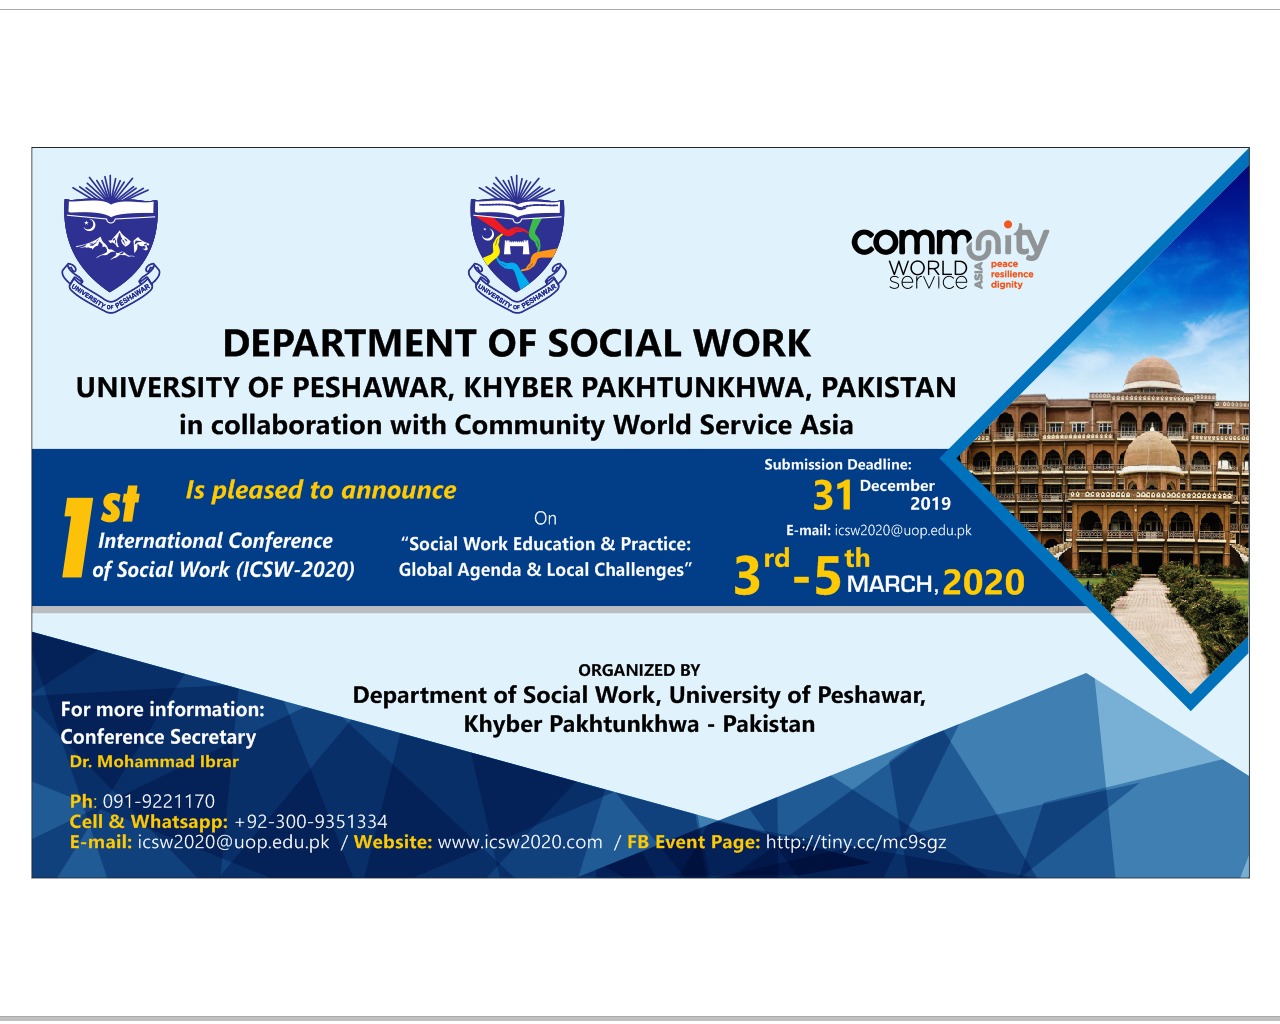 1st International Conference of Social Work (ICSW-2020) On 